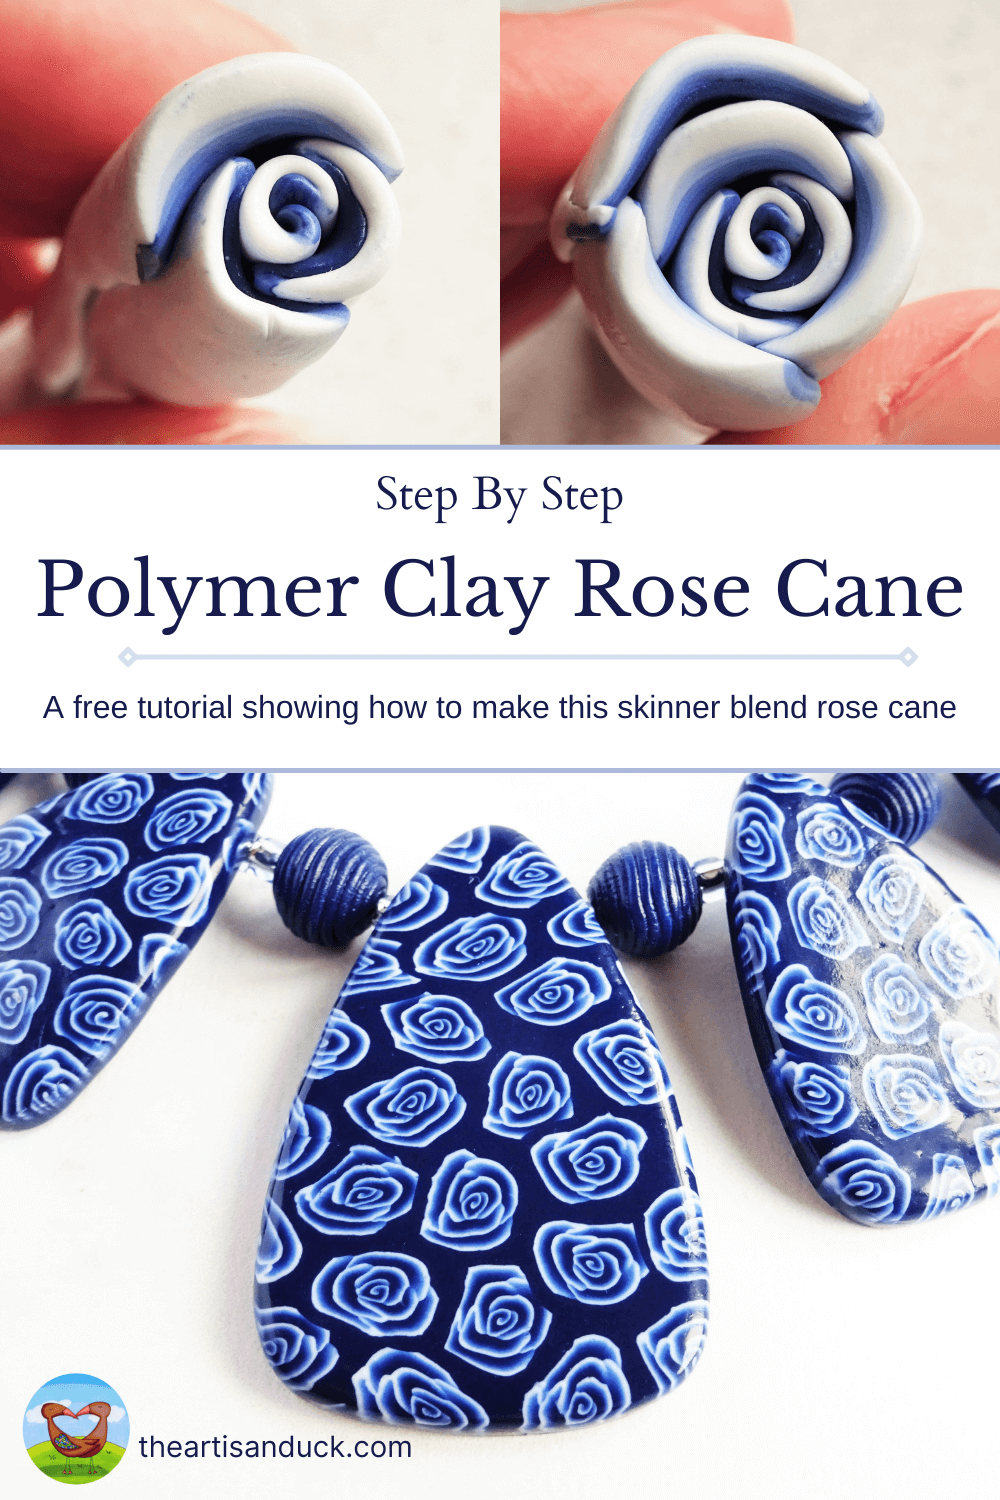 Learn how to sculpt a face in polymer clay with these free online tutorials